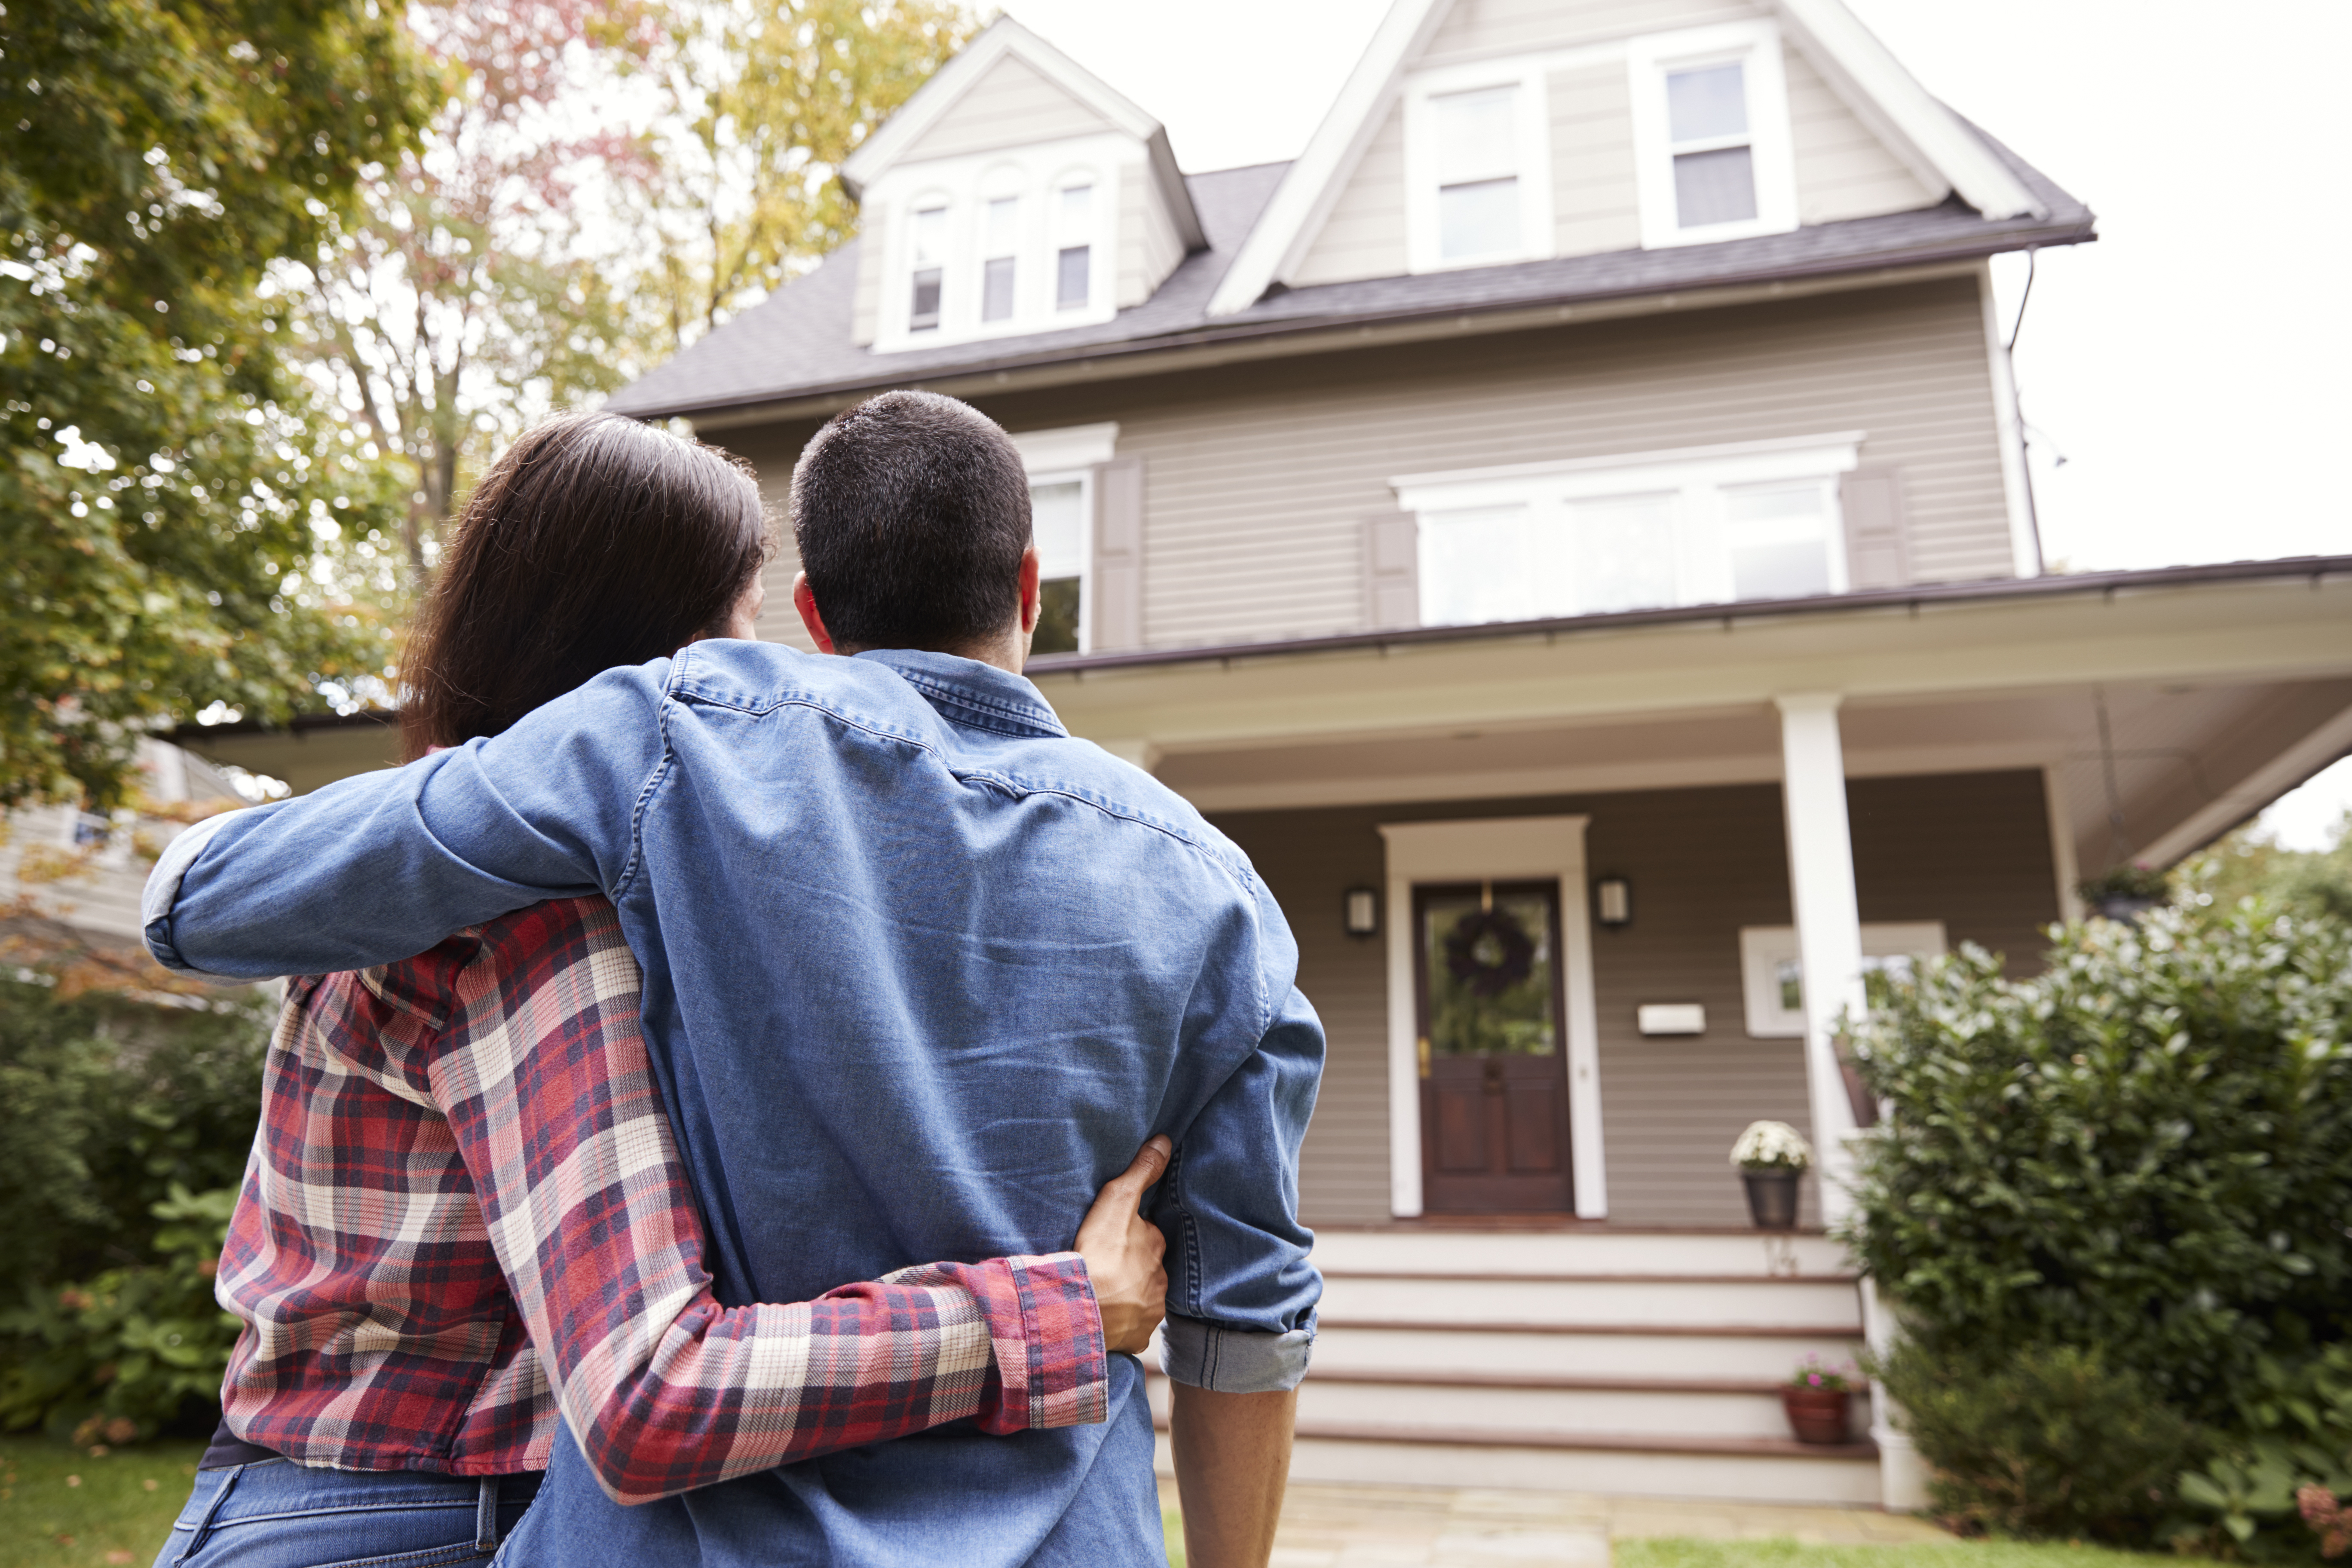 15 Steps to Buying a House - NerdWallet